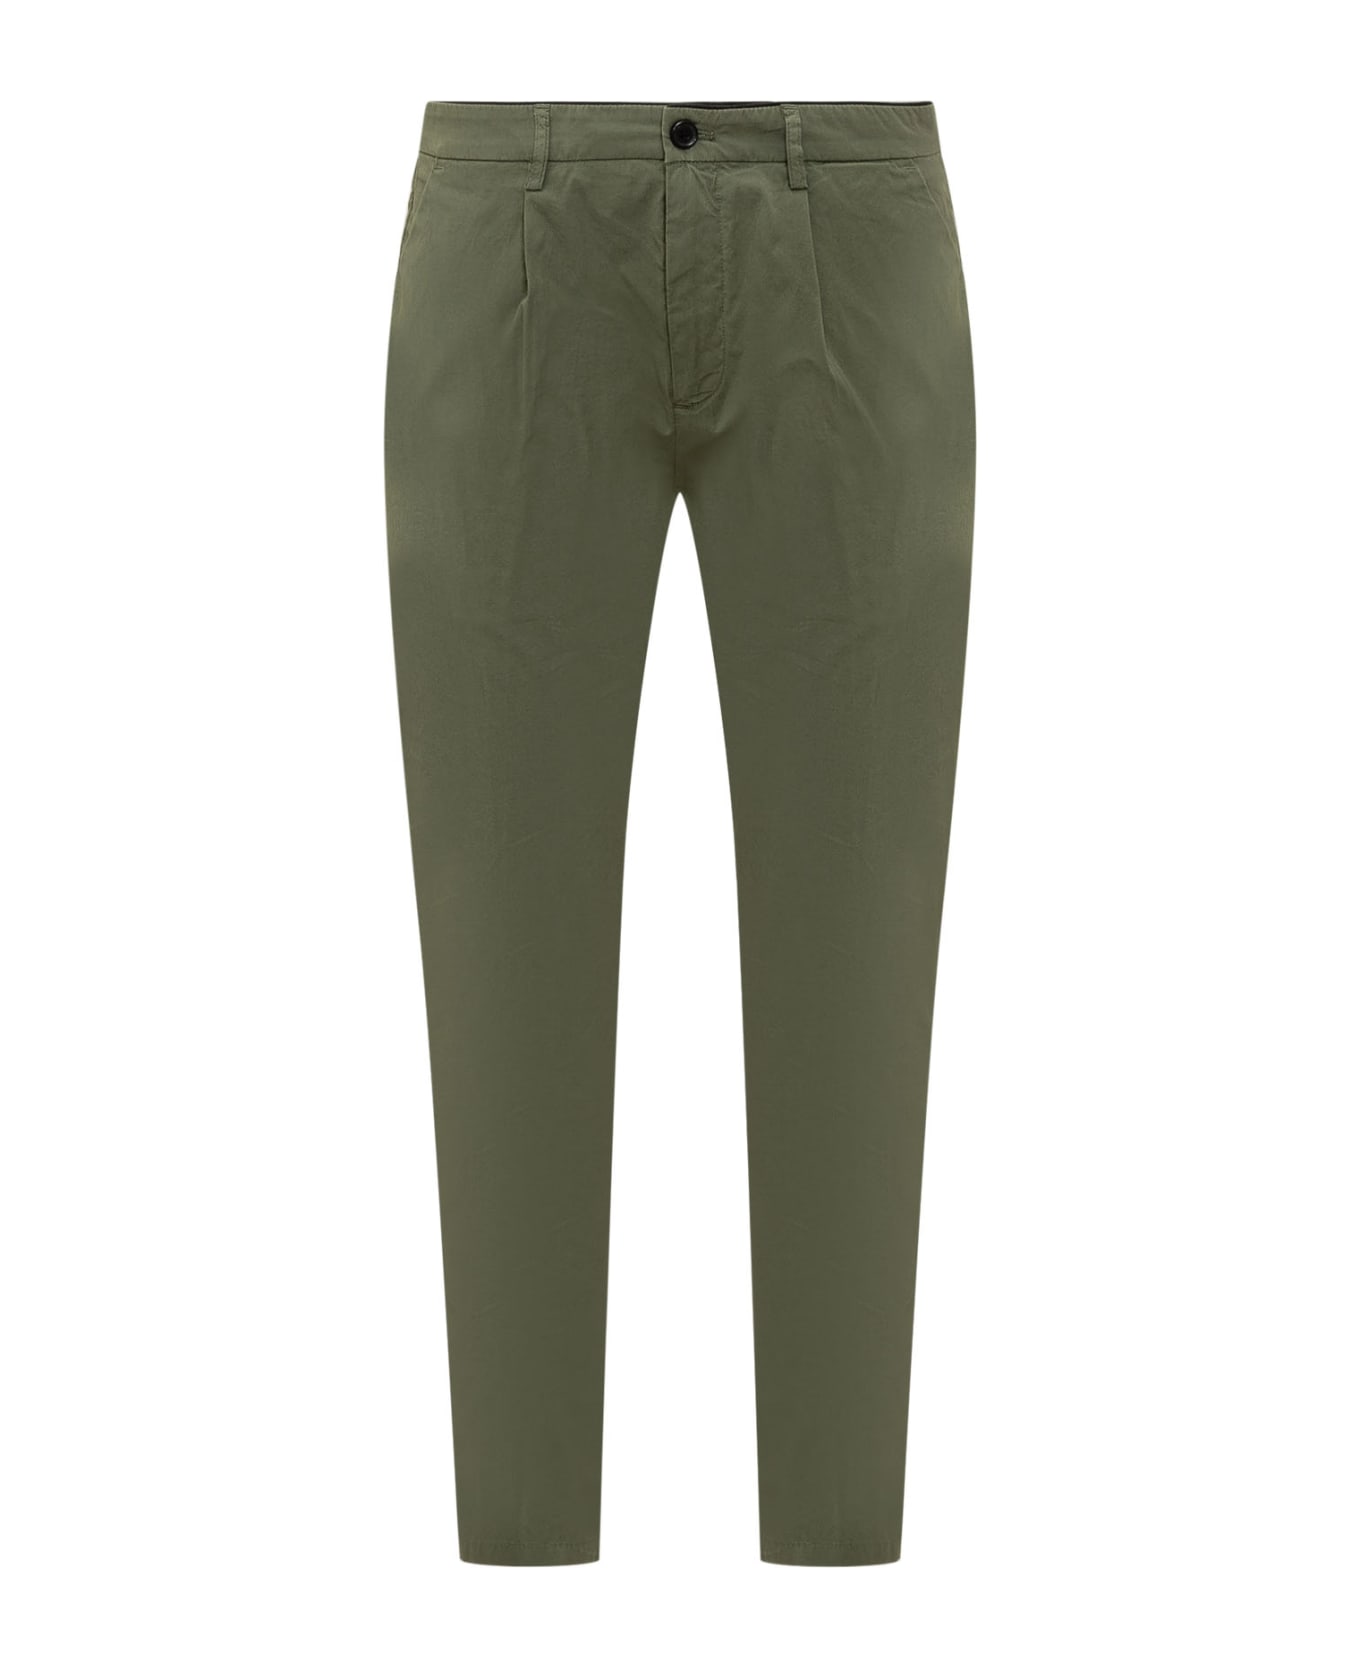 Department Five Prince Chino Pants - MILITARE